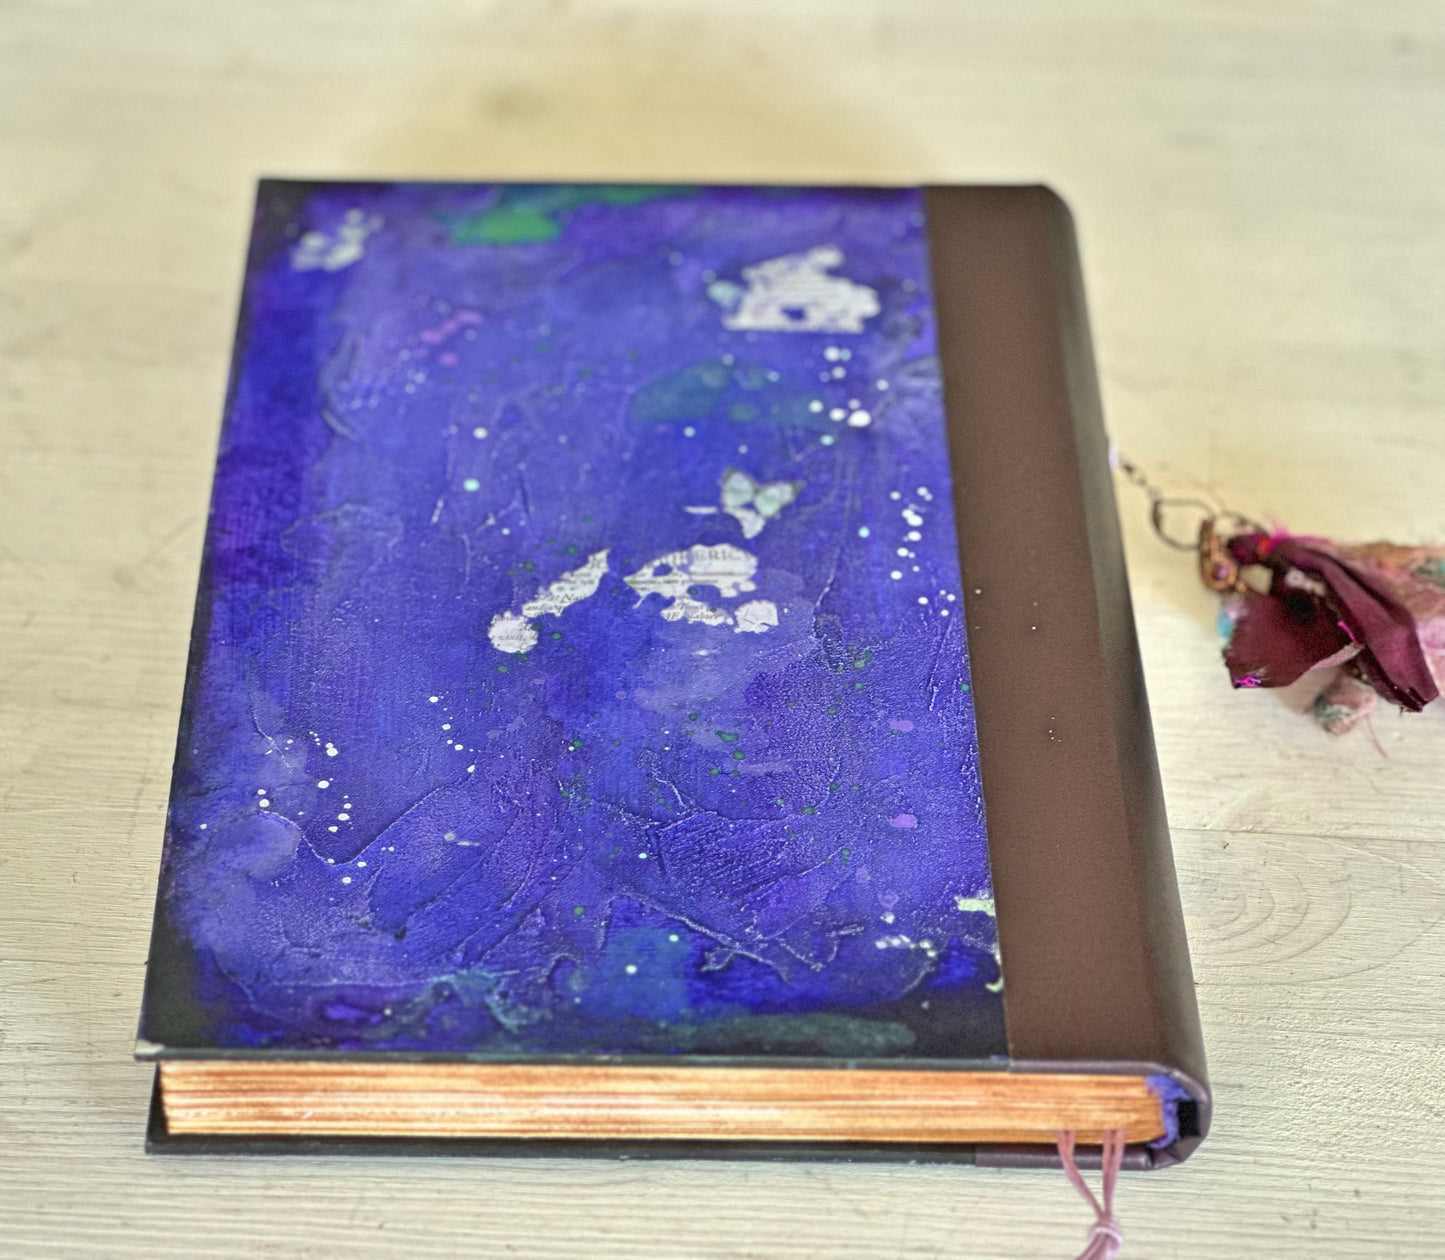 Vintage Fairy Junk Journal Diary Book with decorated pages, Purple Memory Album Notebook Floral Herbiary, Wedding Guest Book, Gift for her